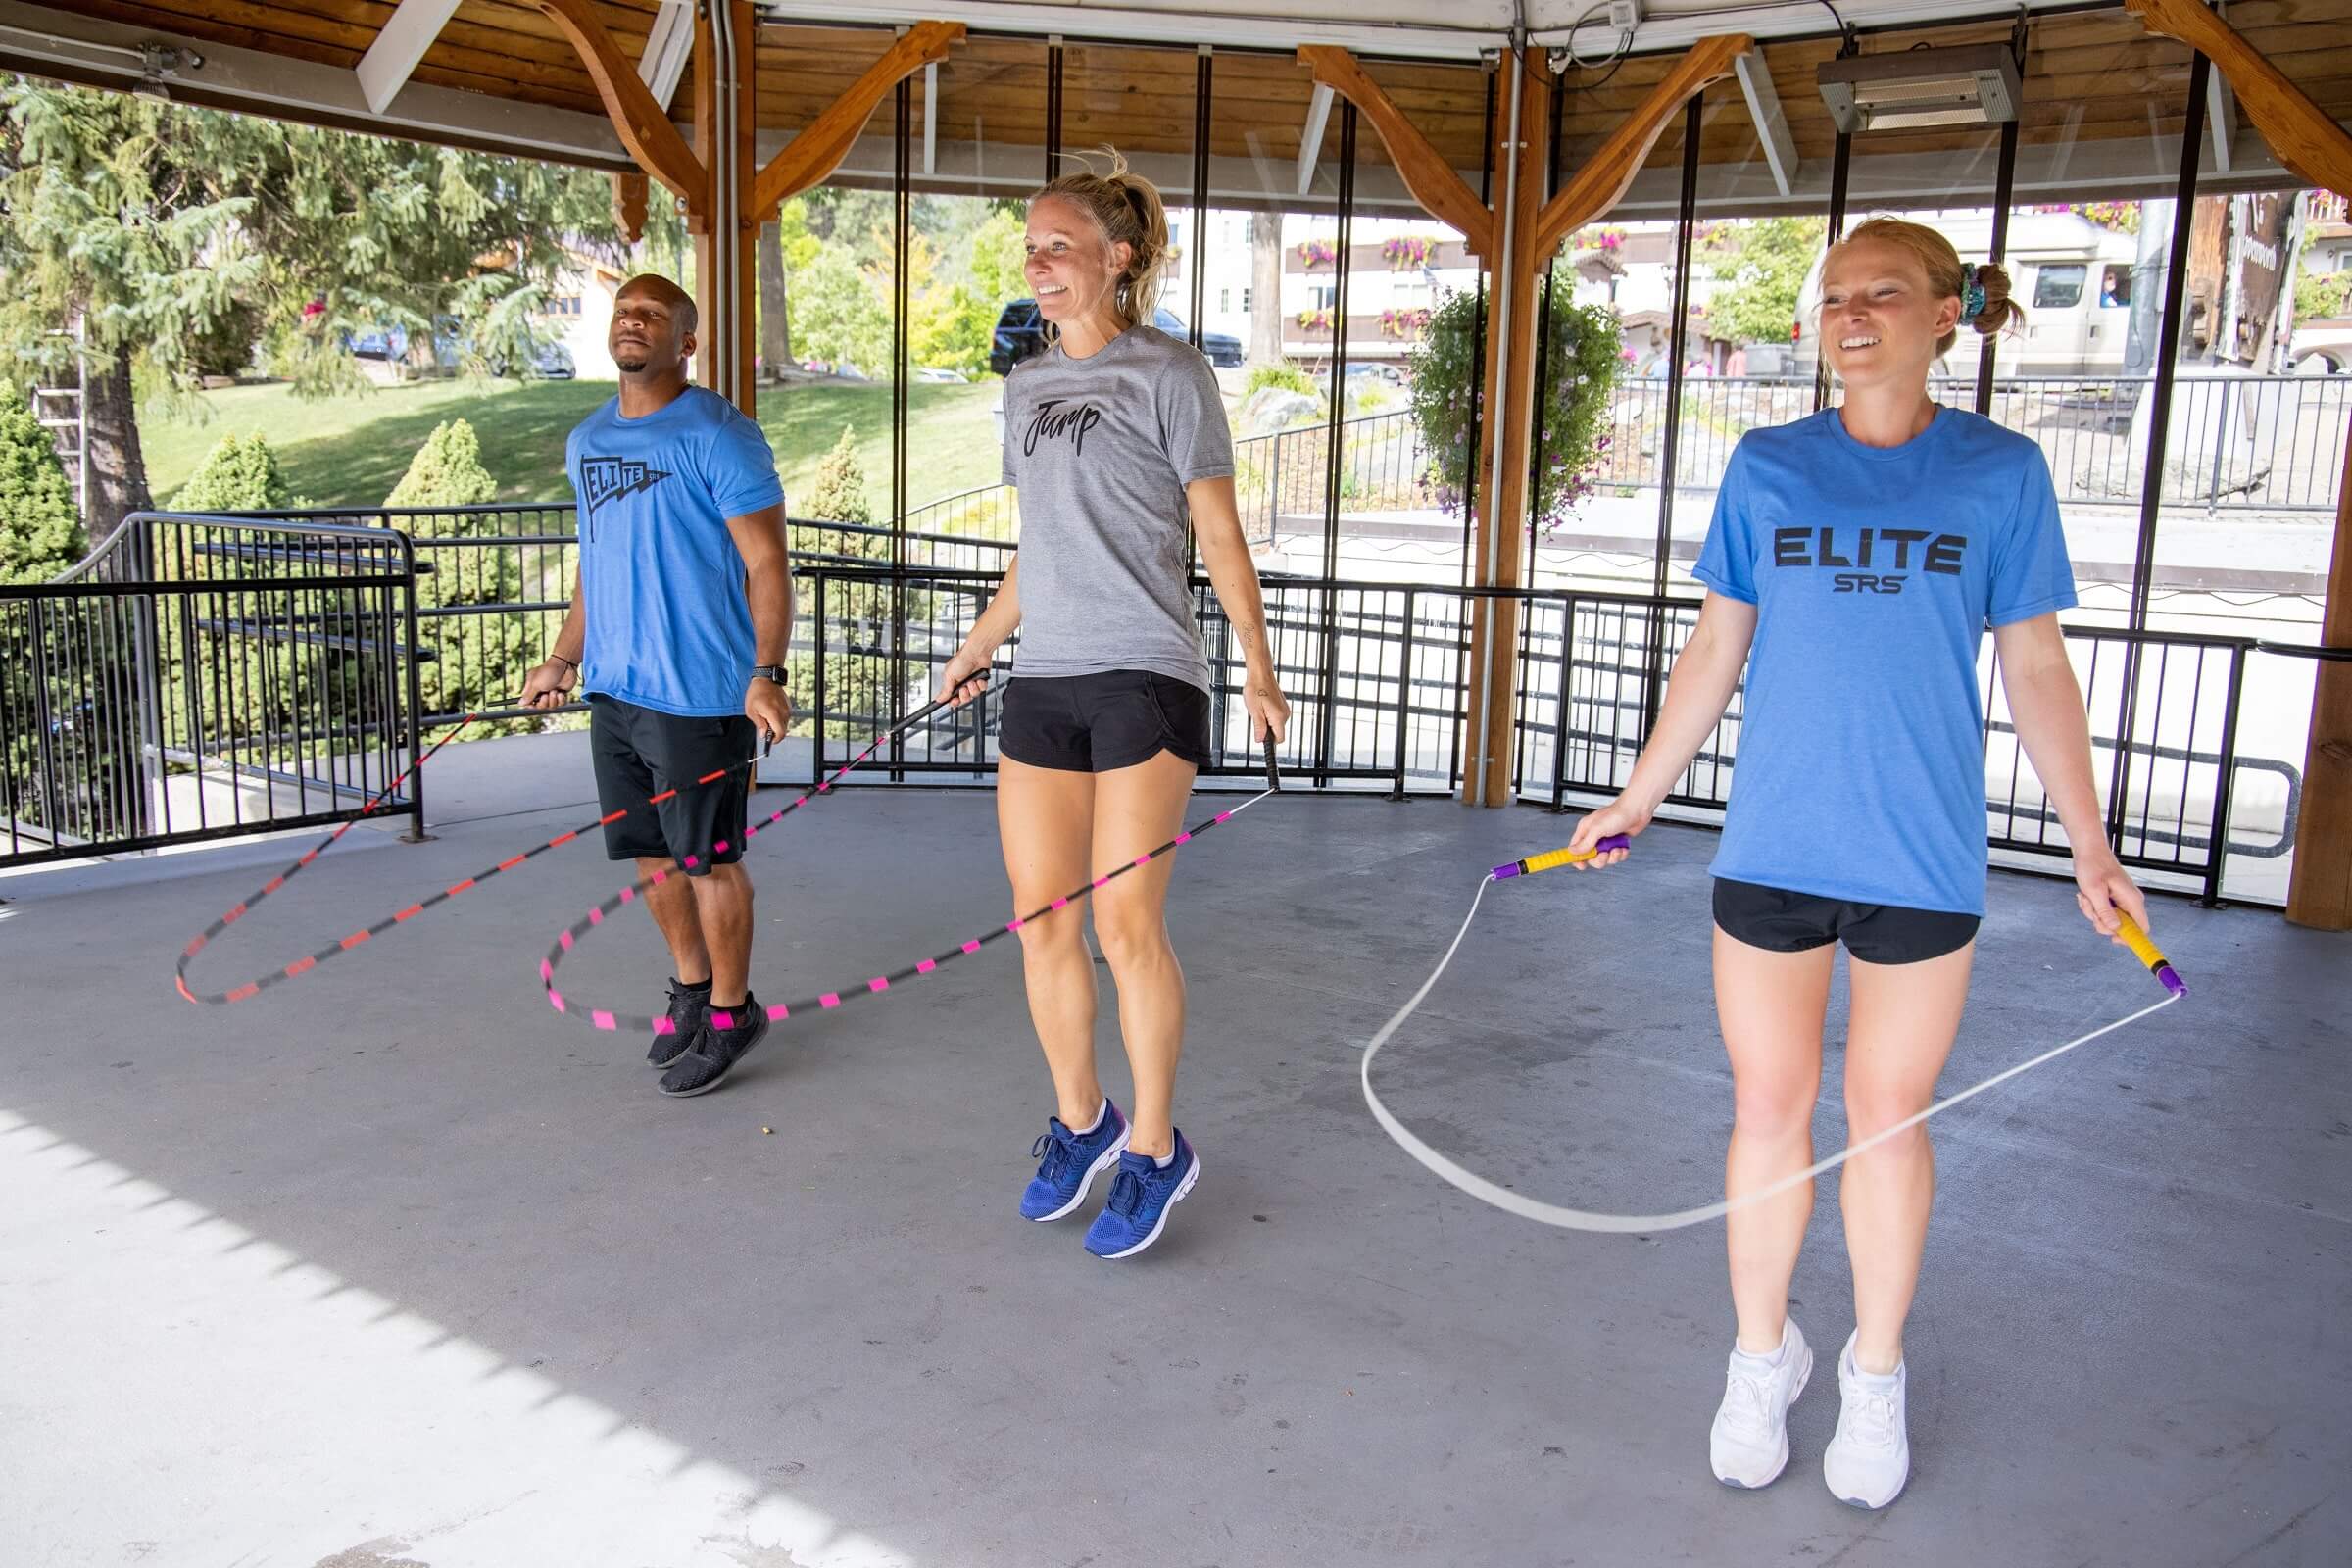 group of people jumping rope - Elite jumps